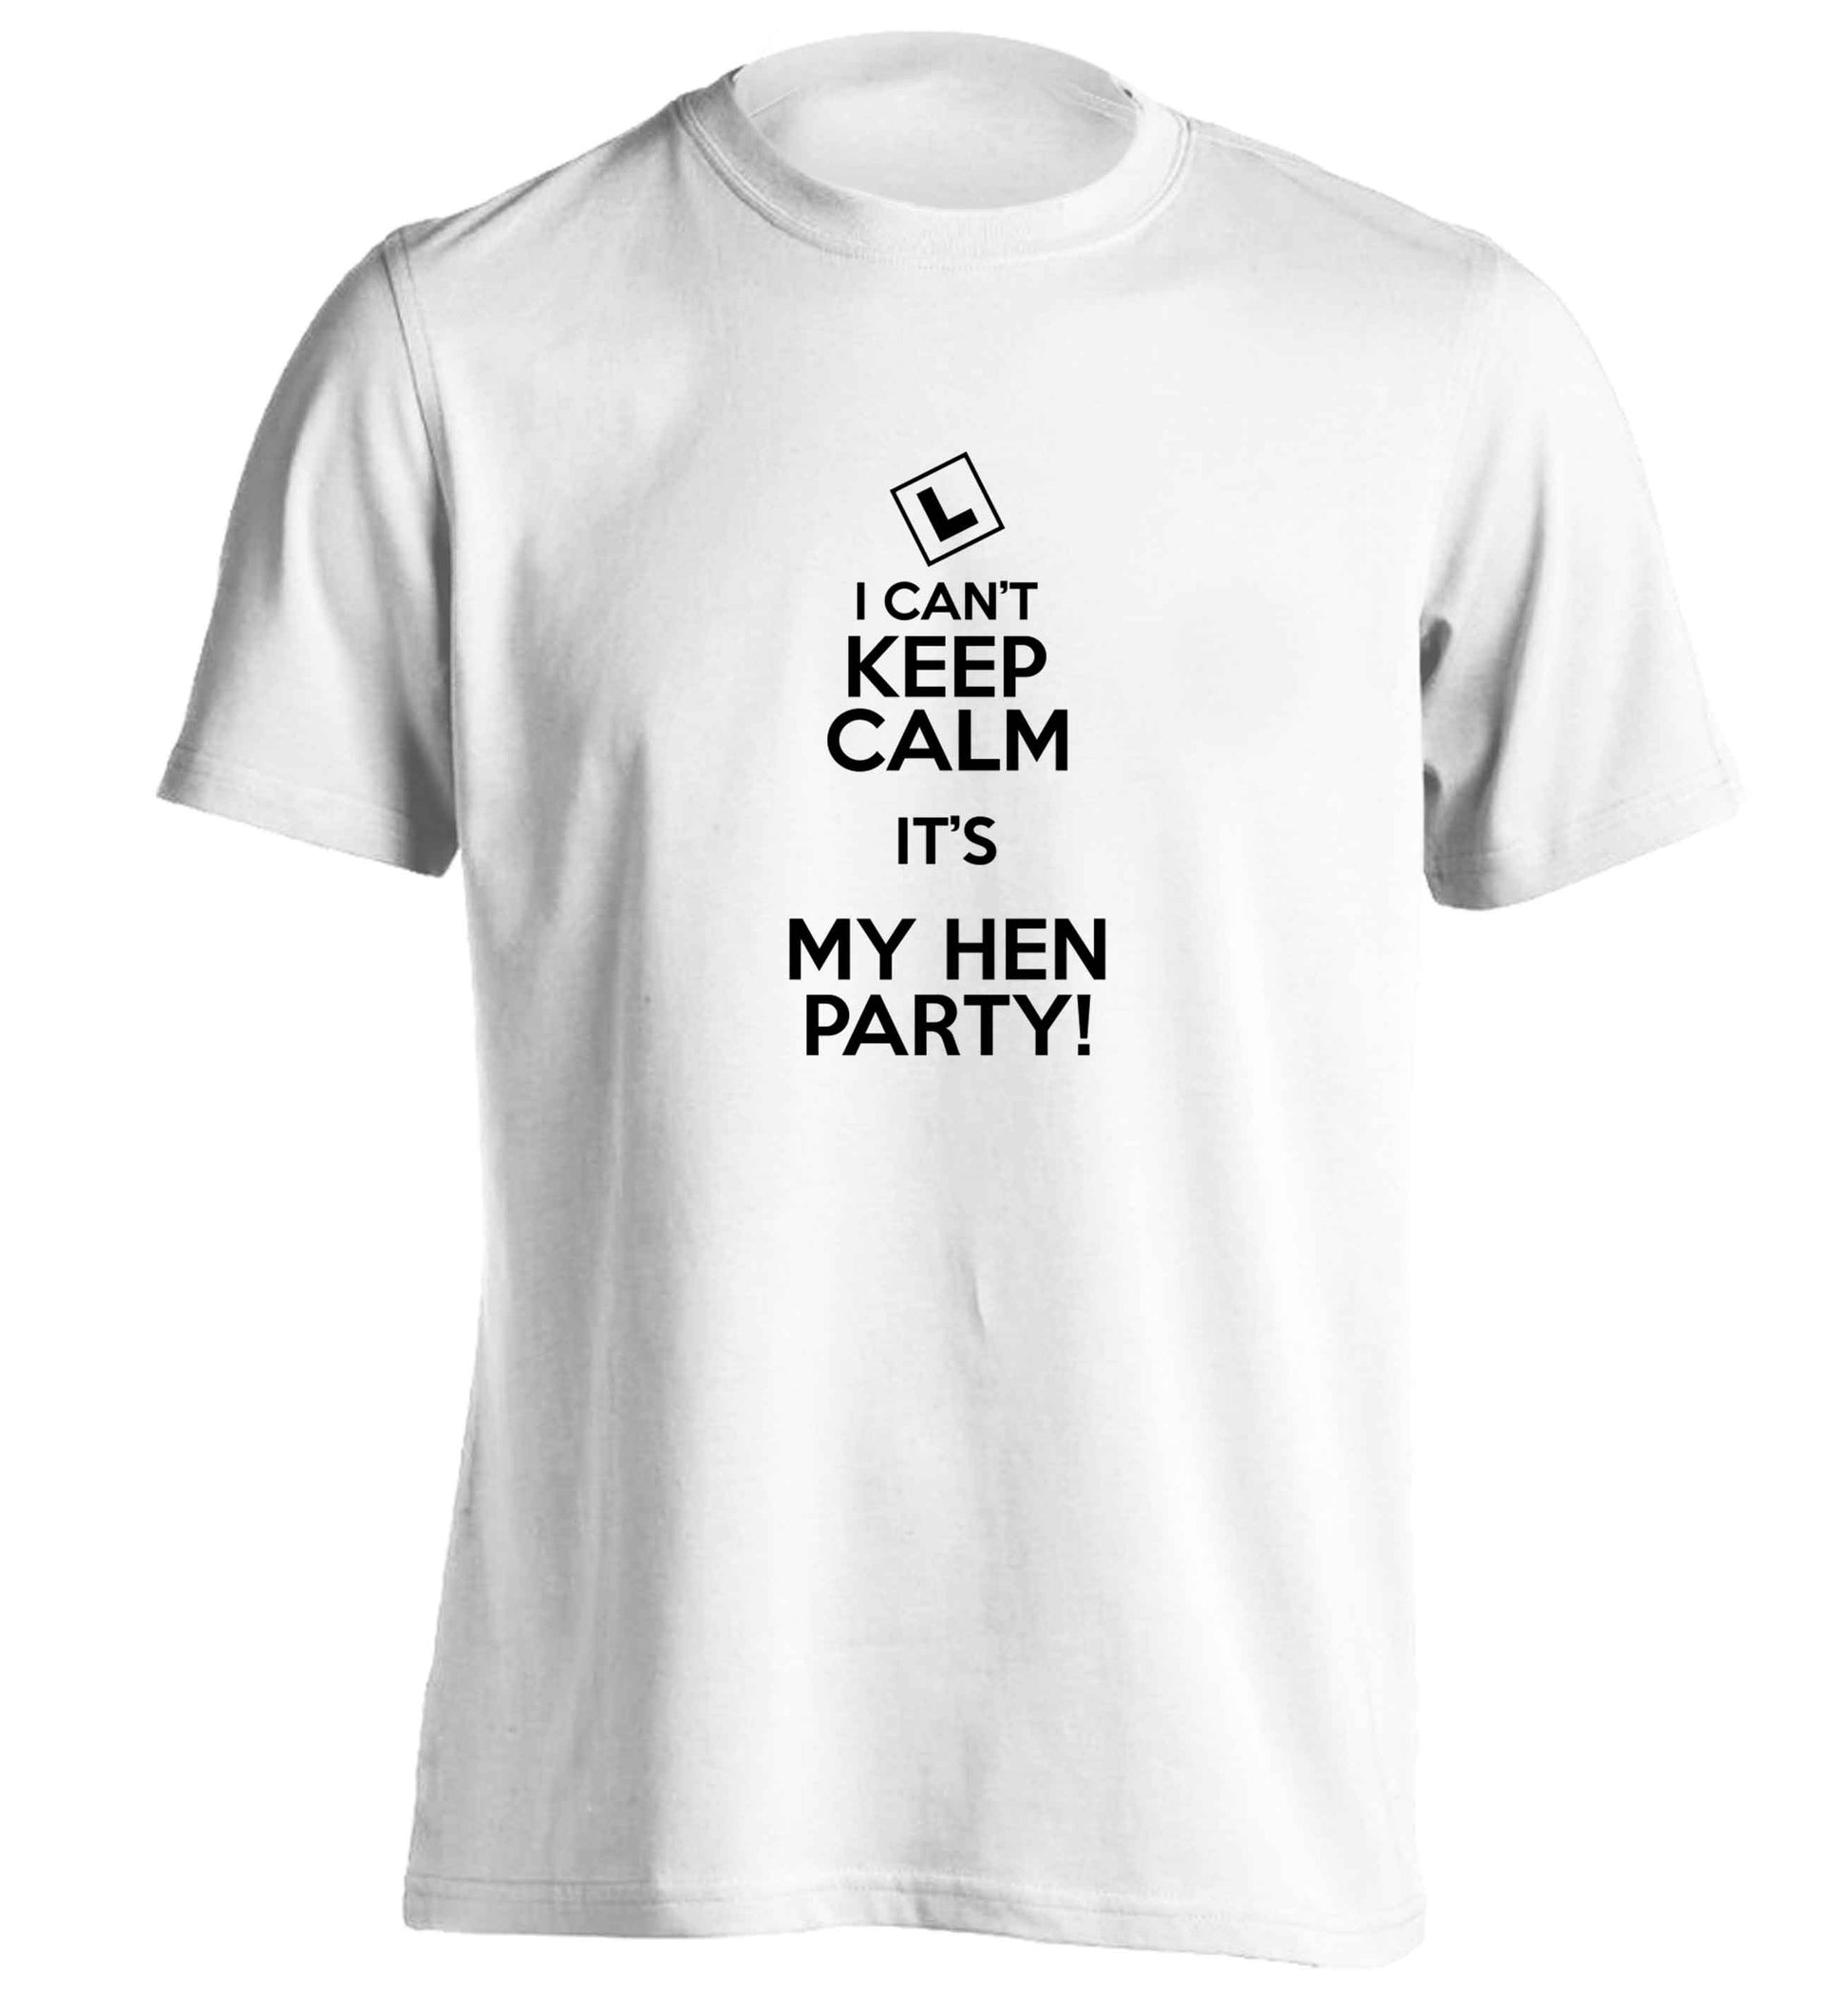 I can't keep calm it's my hen party adults unisex white Tshirt 2XL